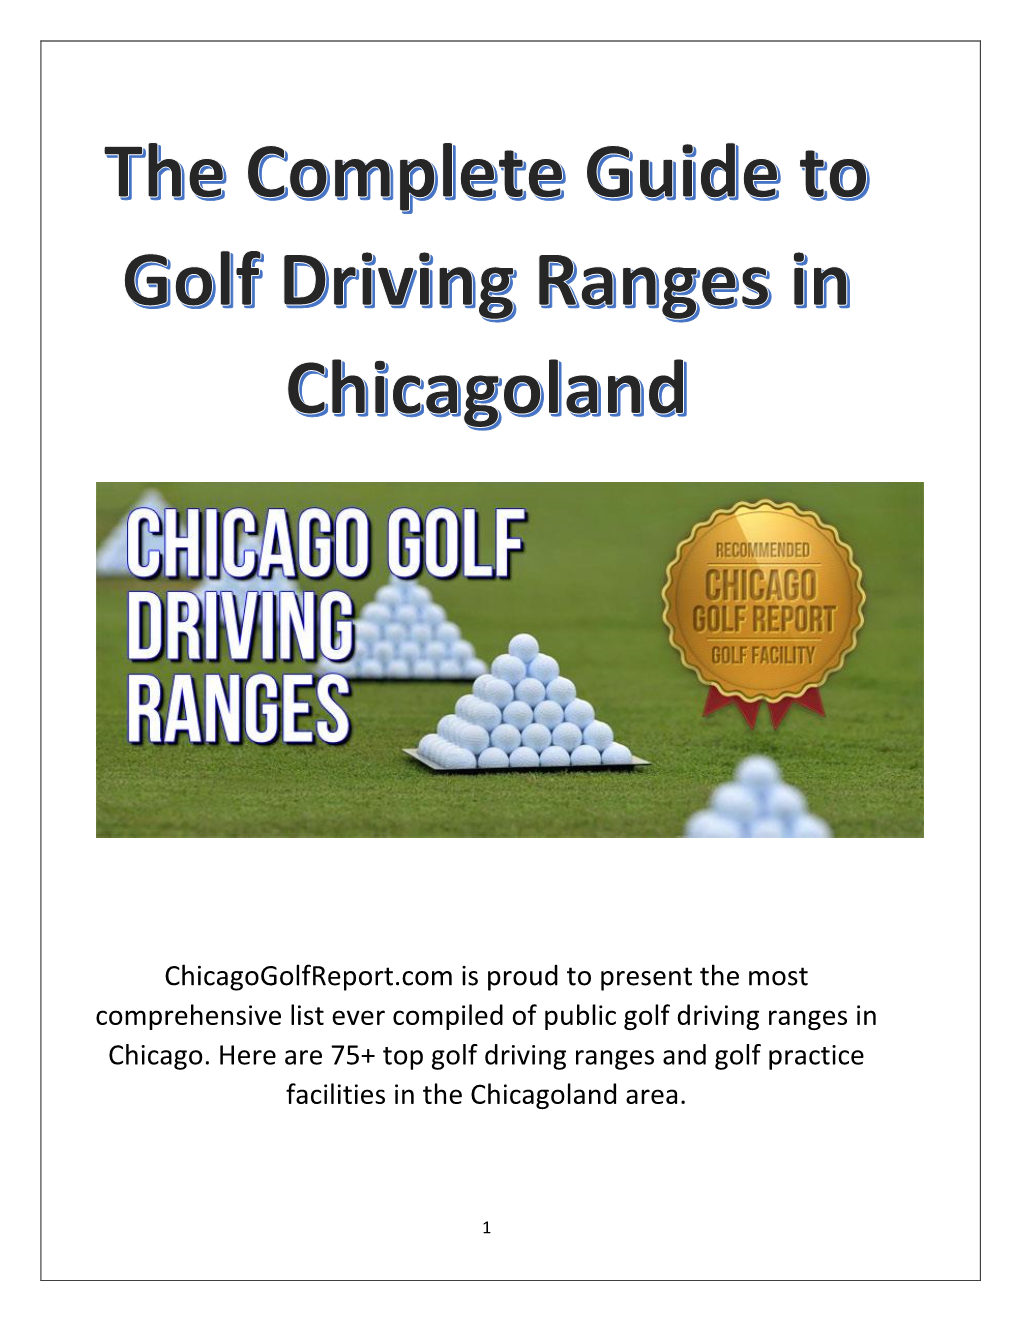 Chicagogolfreport.Com Is Proud to Present the Most Comprehensive List Ever Compiled of Public Golf Driving Ranges in Chicago